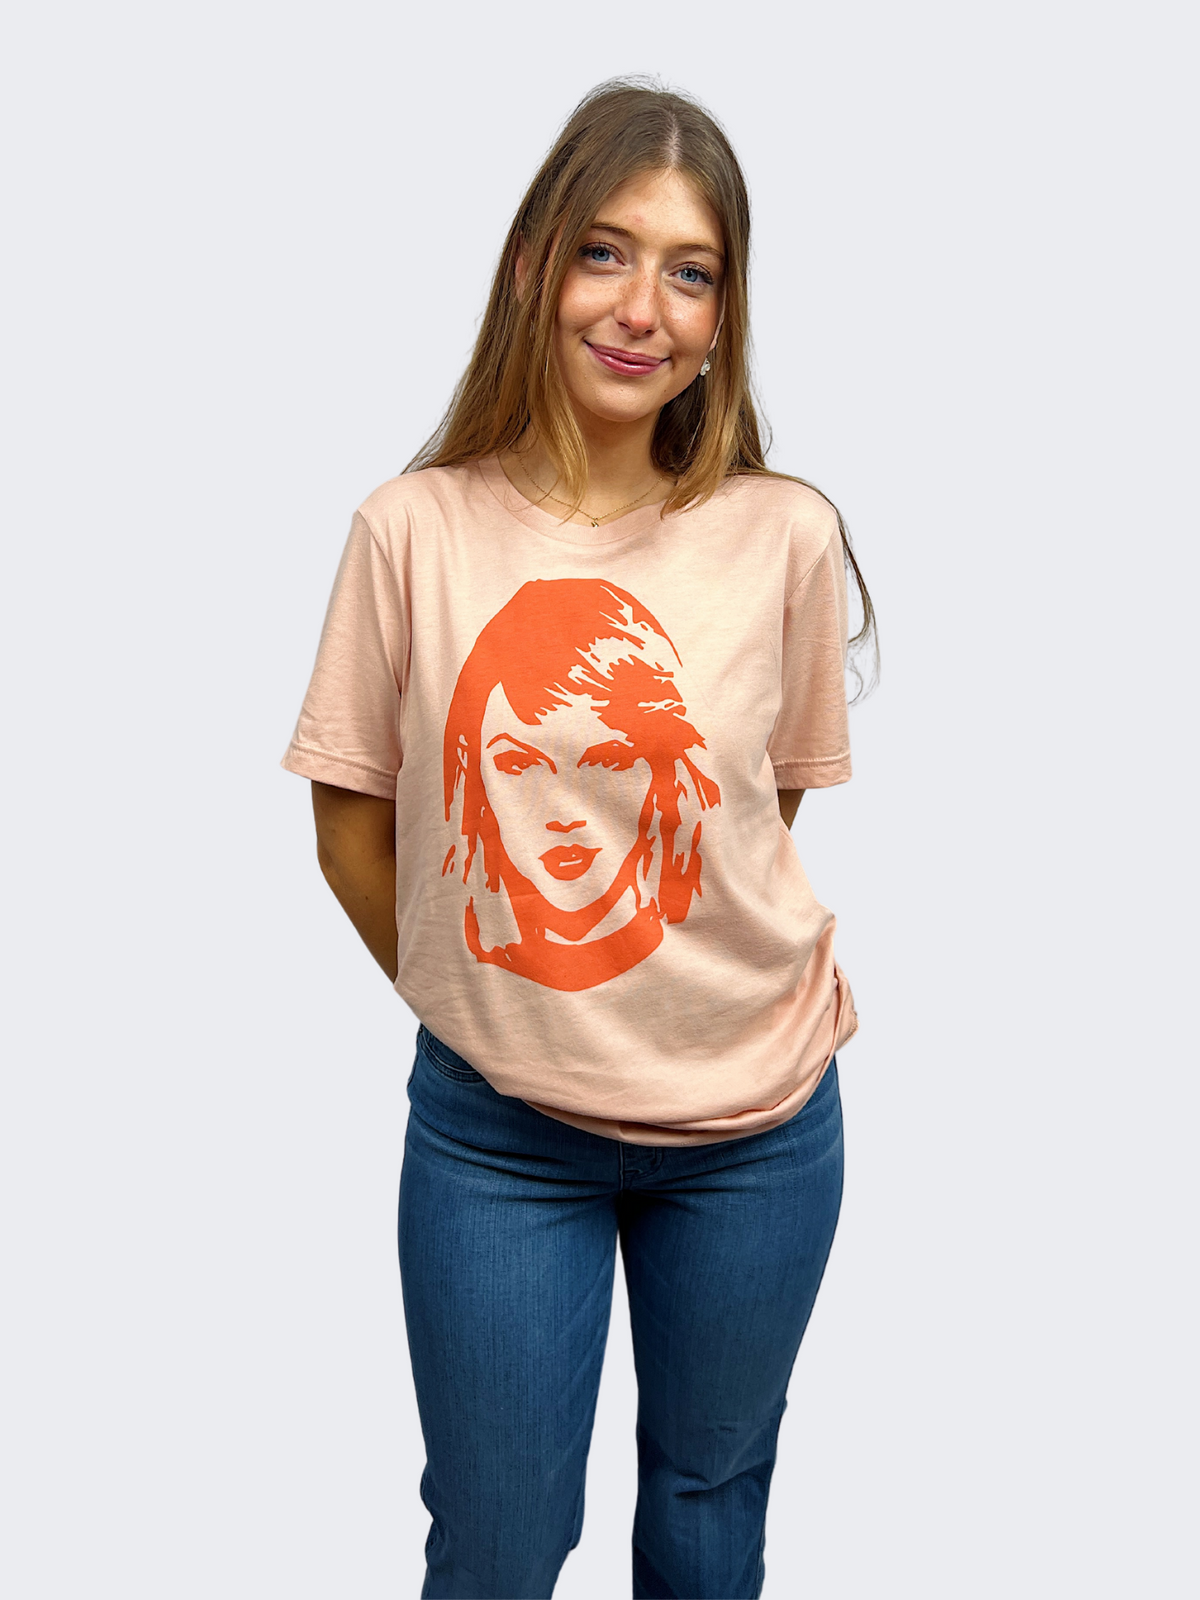 taylor swift face graphic tee in peach orange-front view